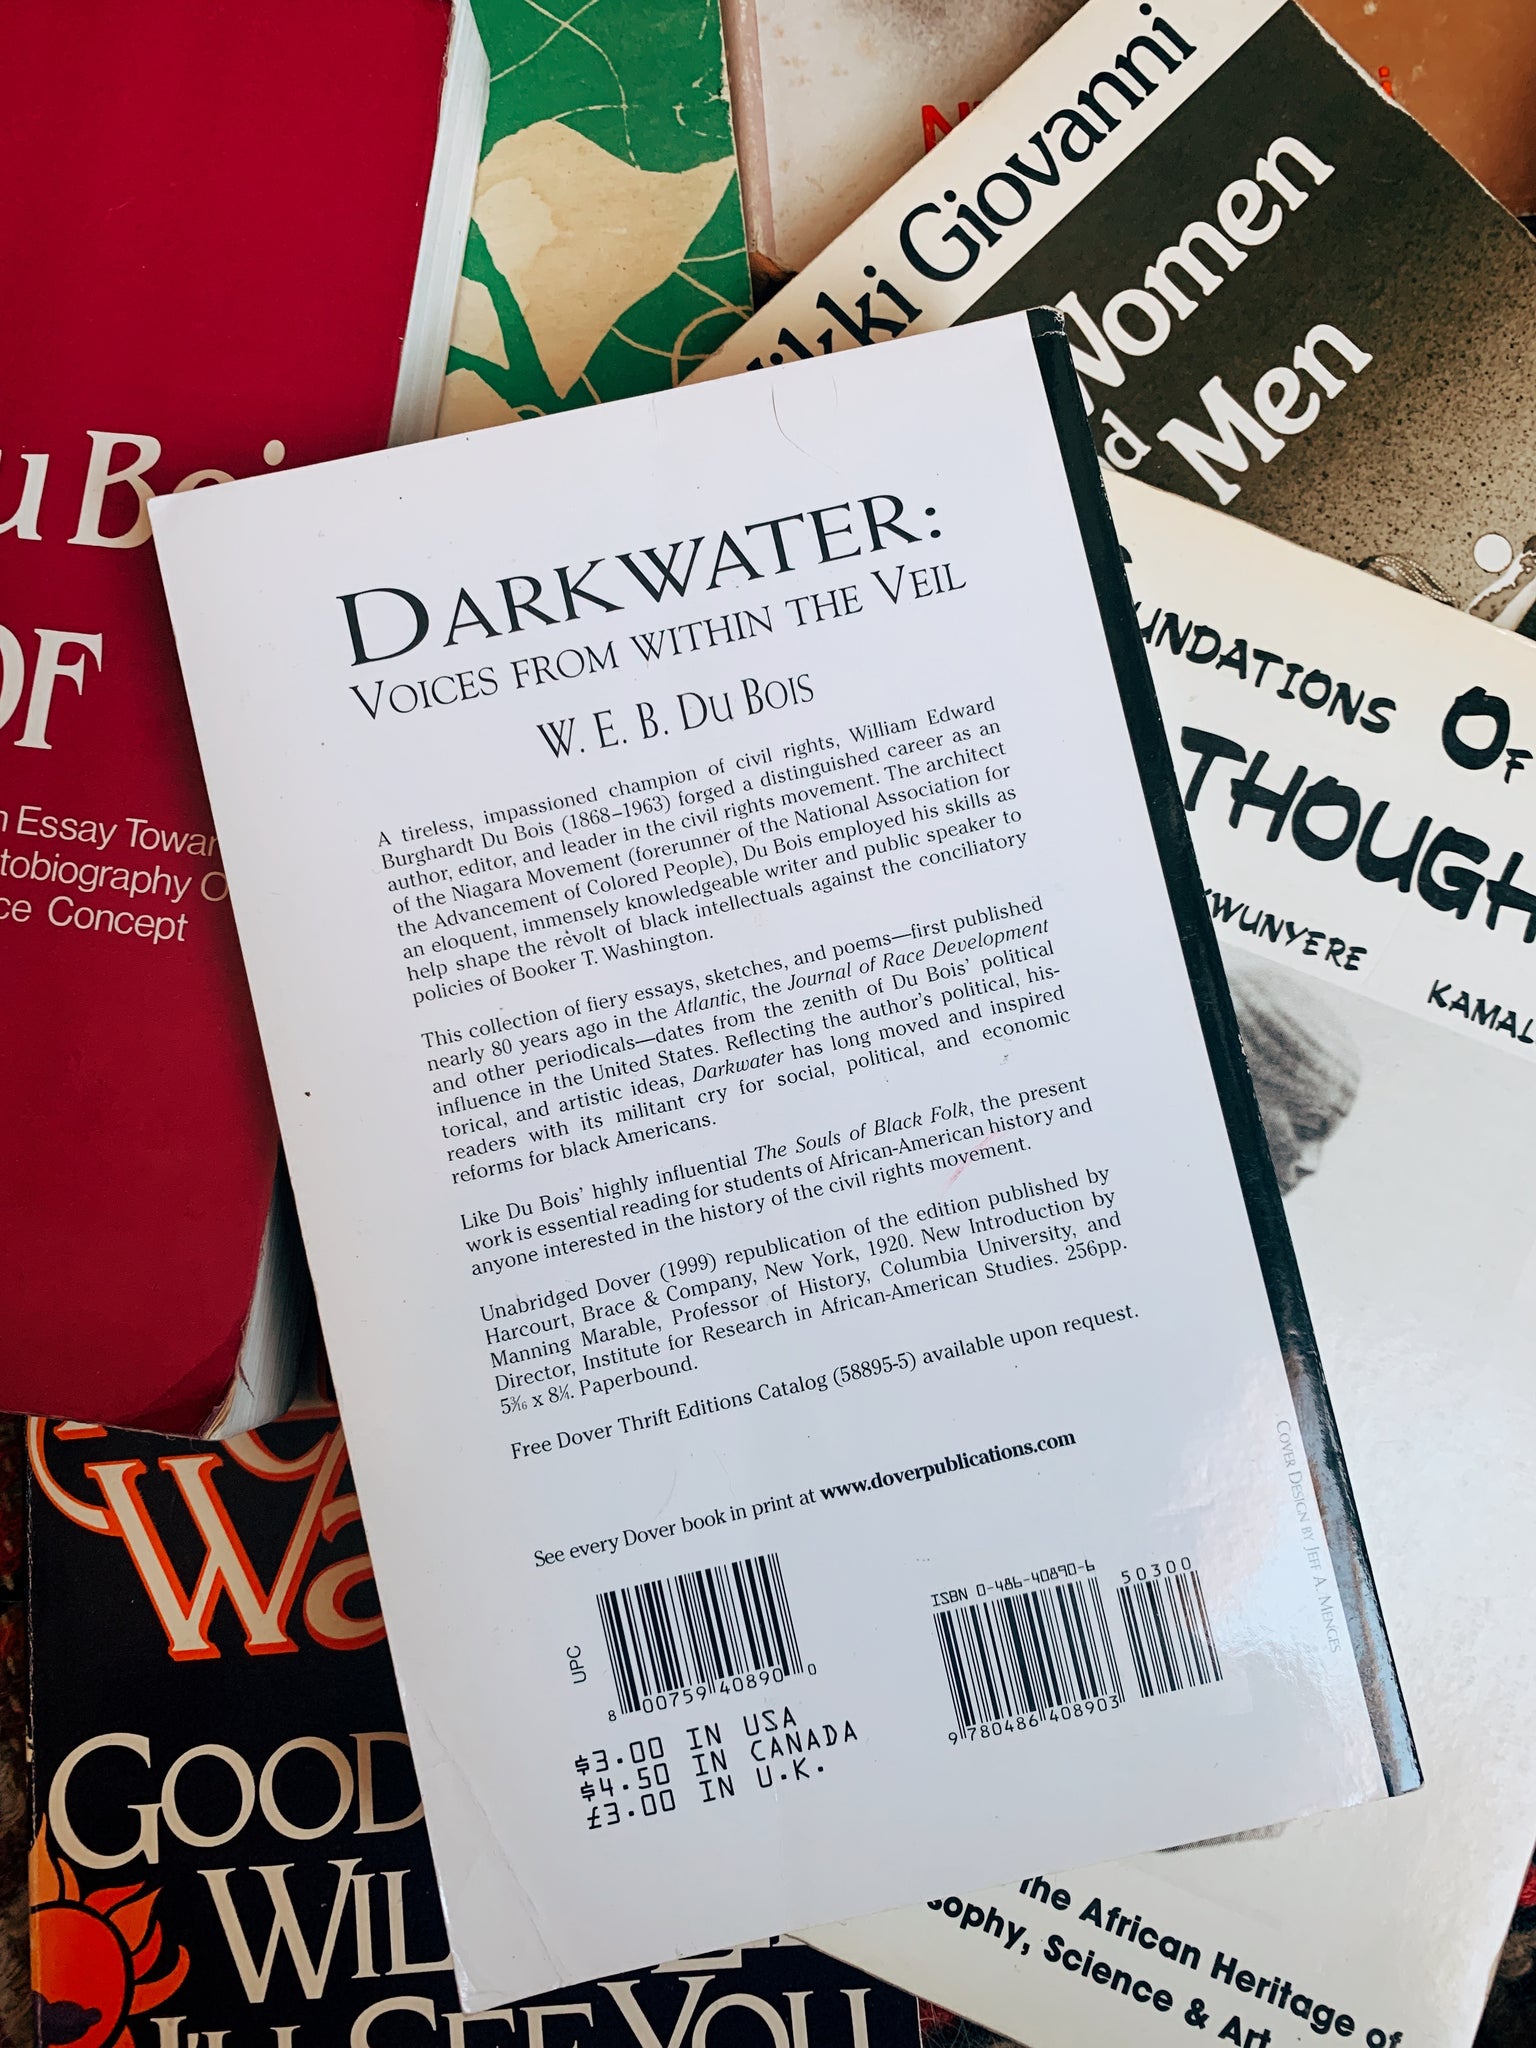 Vintage "Darkwater: Voices From Within The Veil” by W.E.B. DuBois (1999)